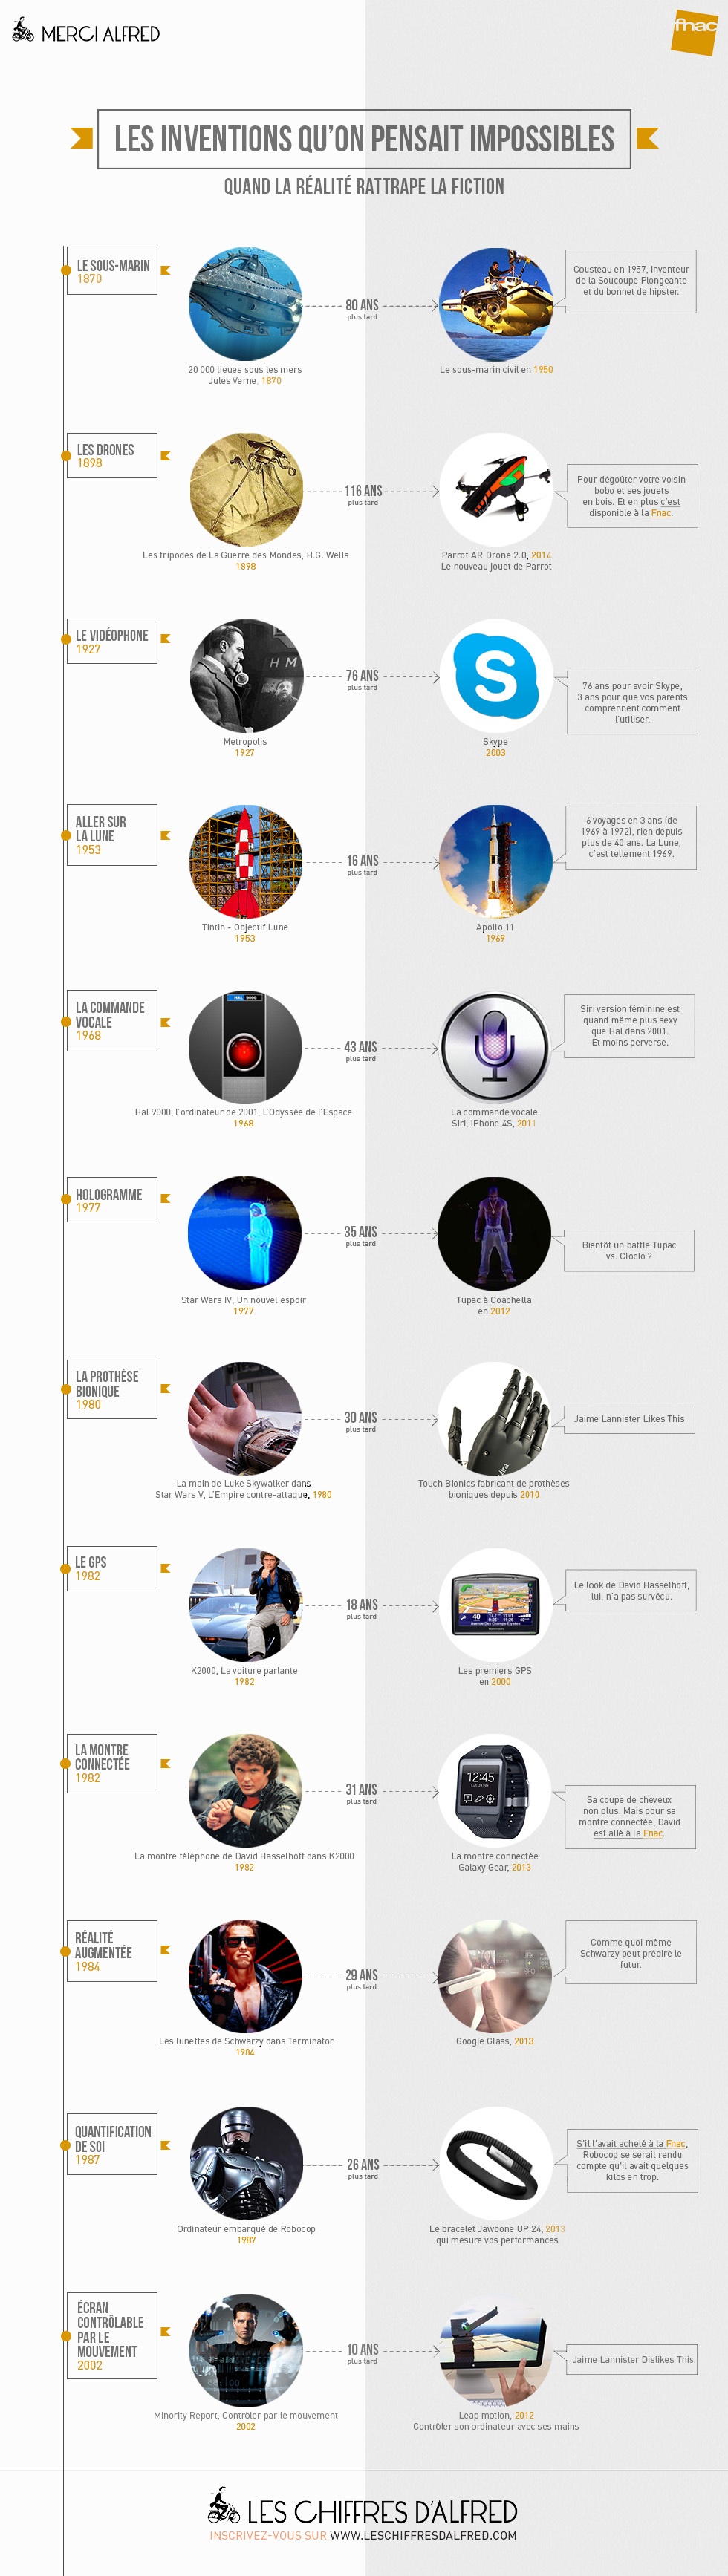 infographie_fiction-future_merci-alfred